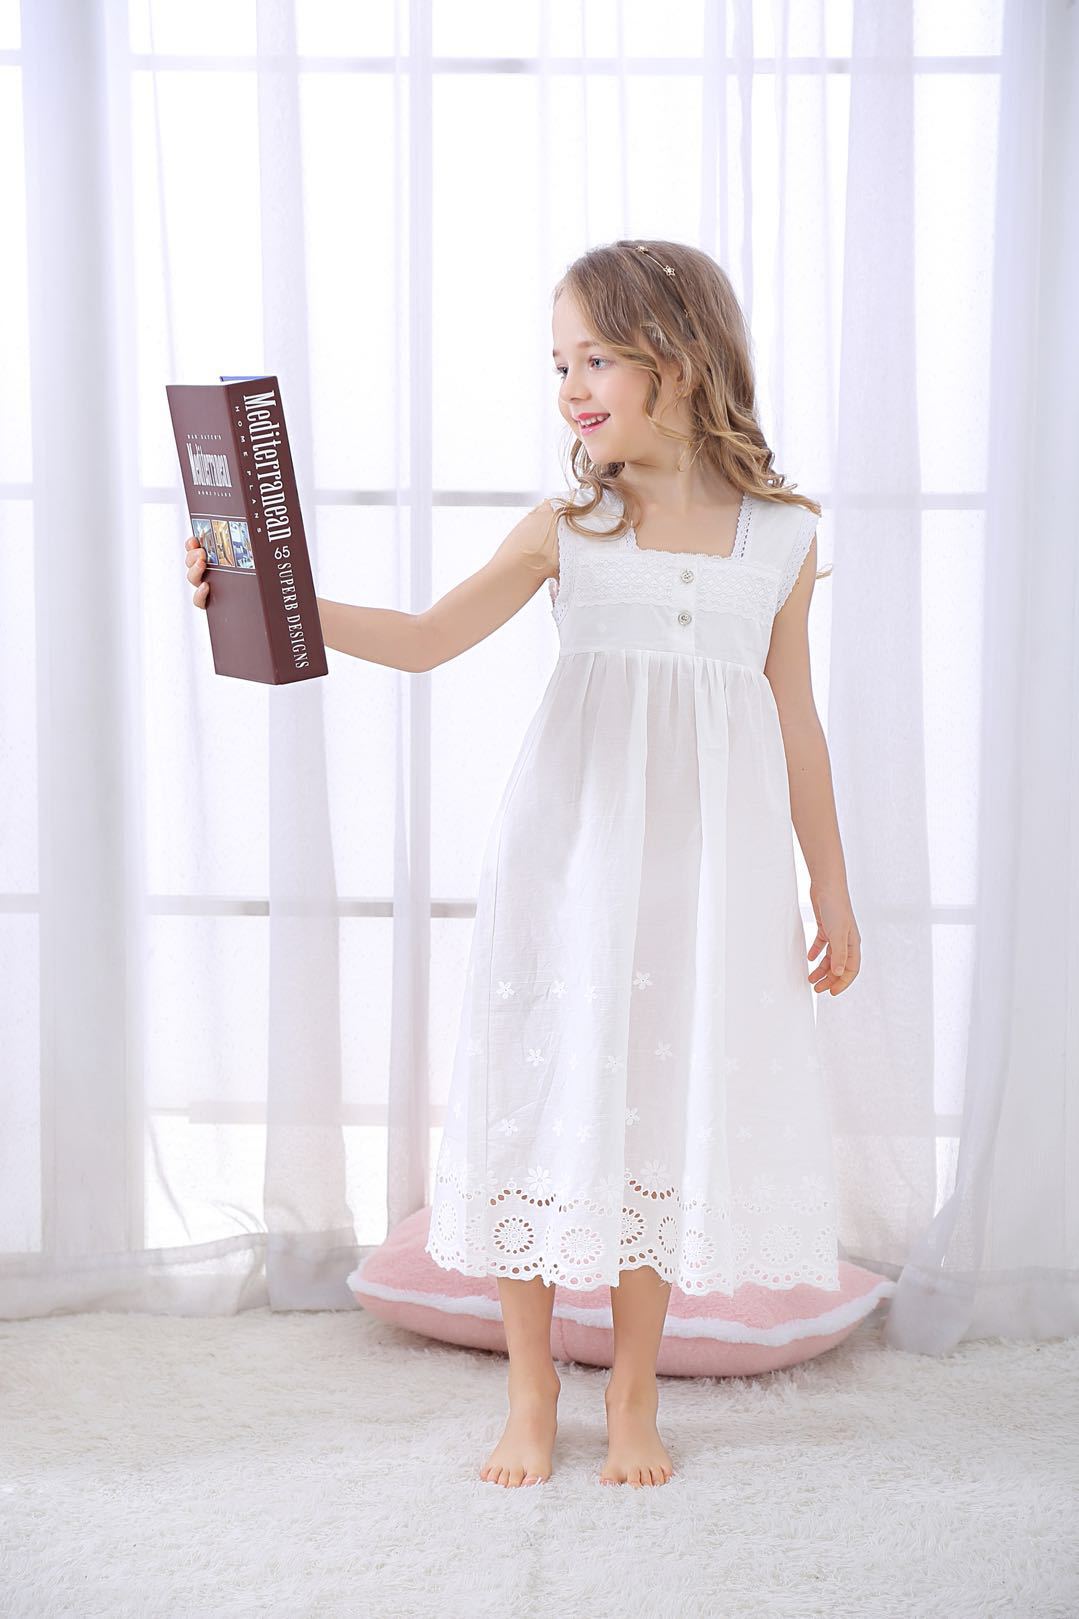 New Girls' White Cotton Computer Embroidery Dress